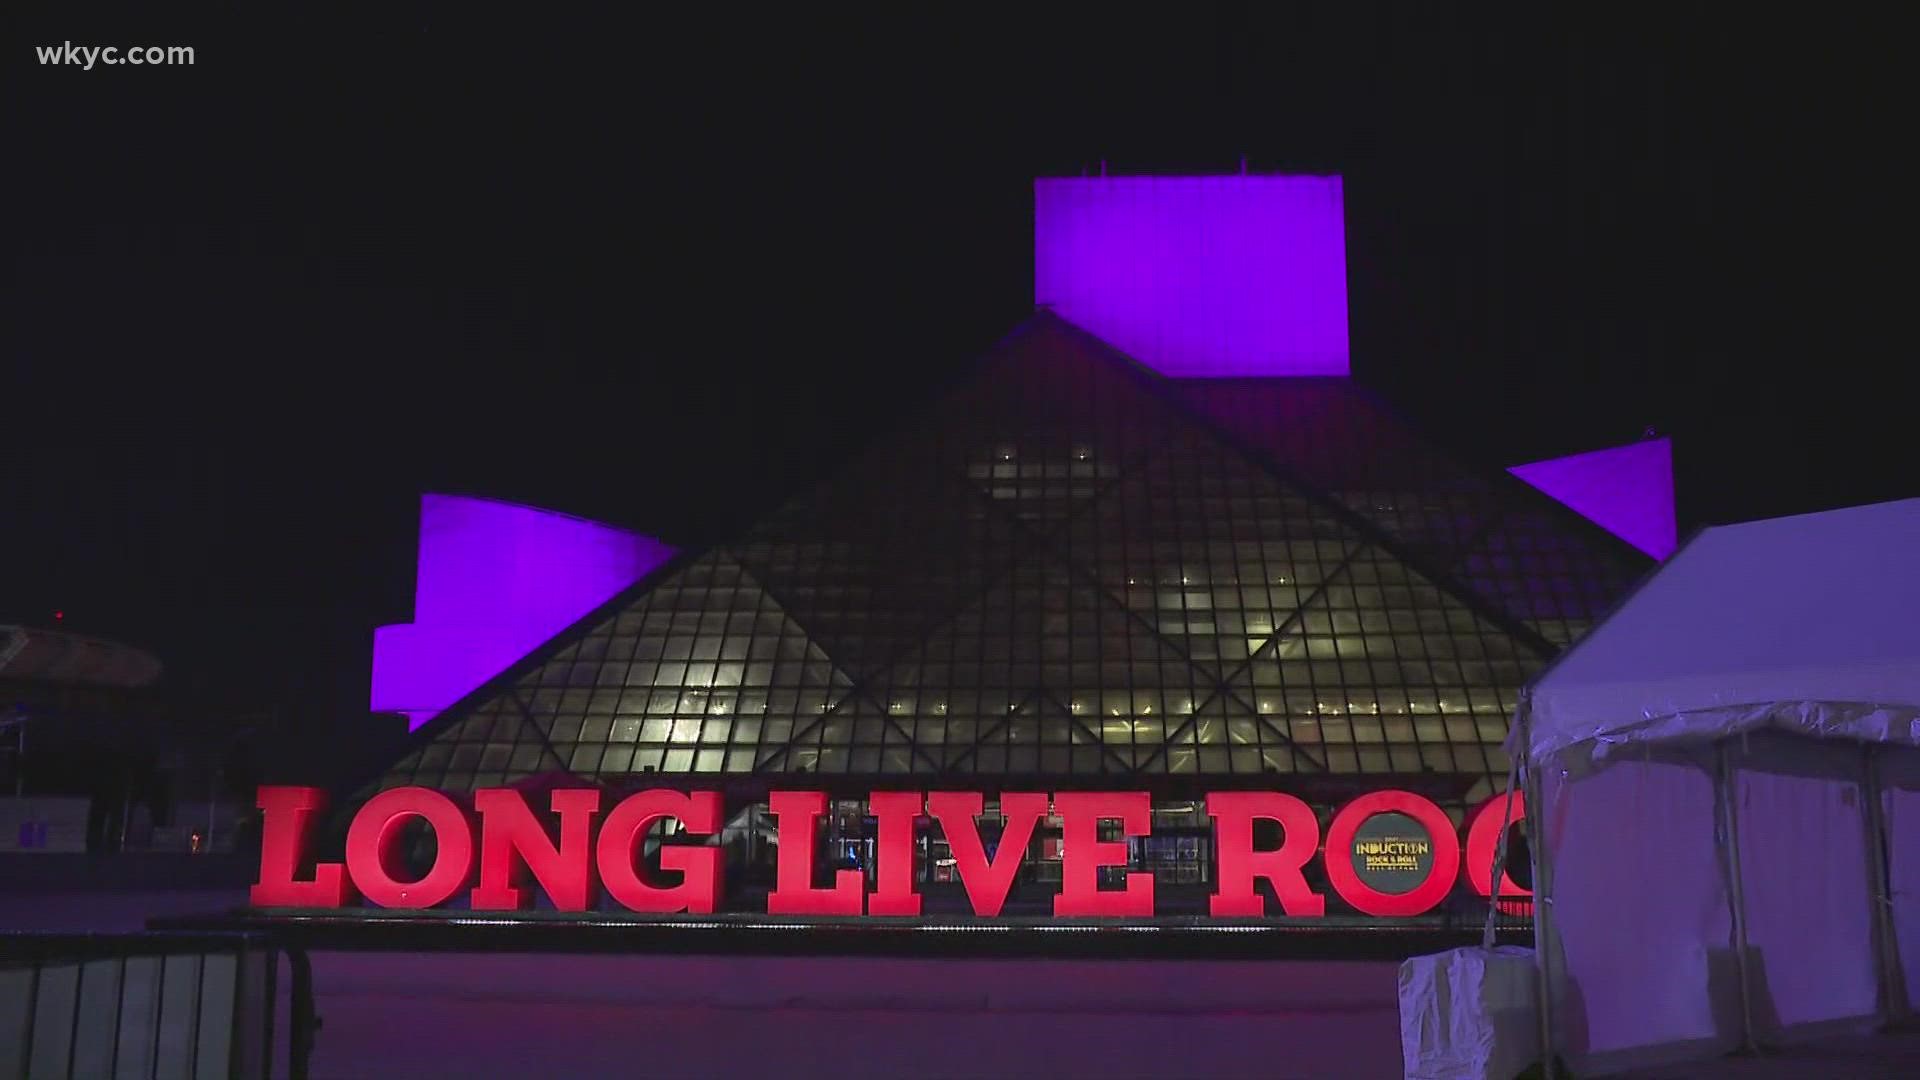 The Rock and Roll Hall of Fame Induction is set to take place on Saturday at 8 p.m. at Rocket Mortgage FieldHouse.